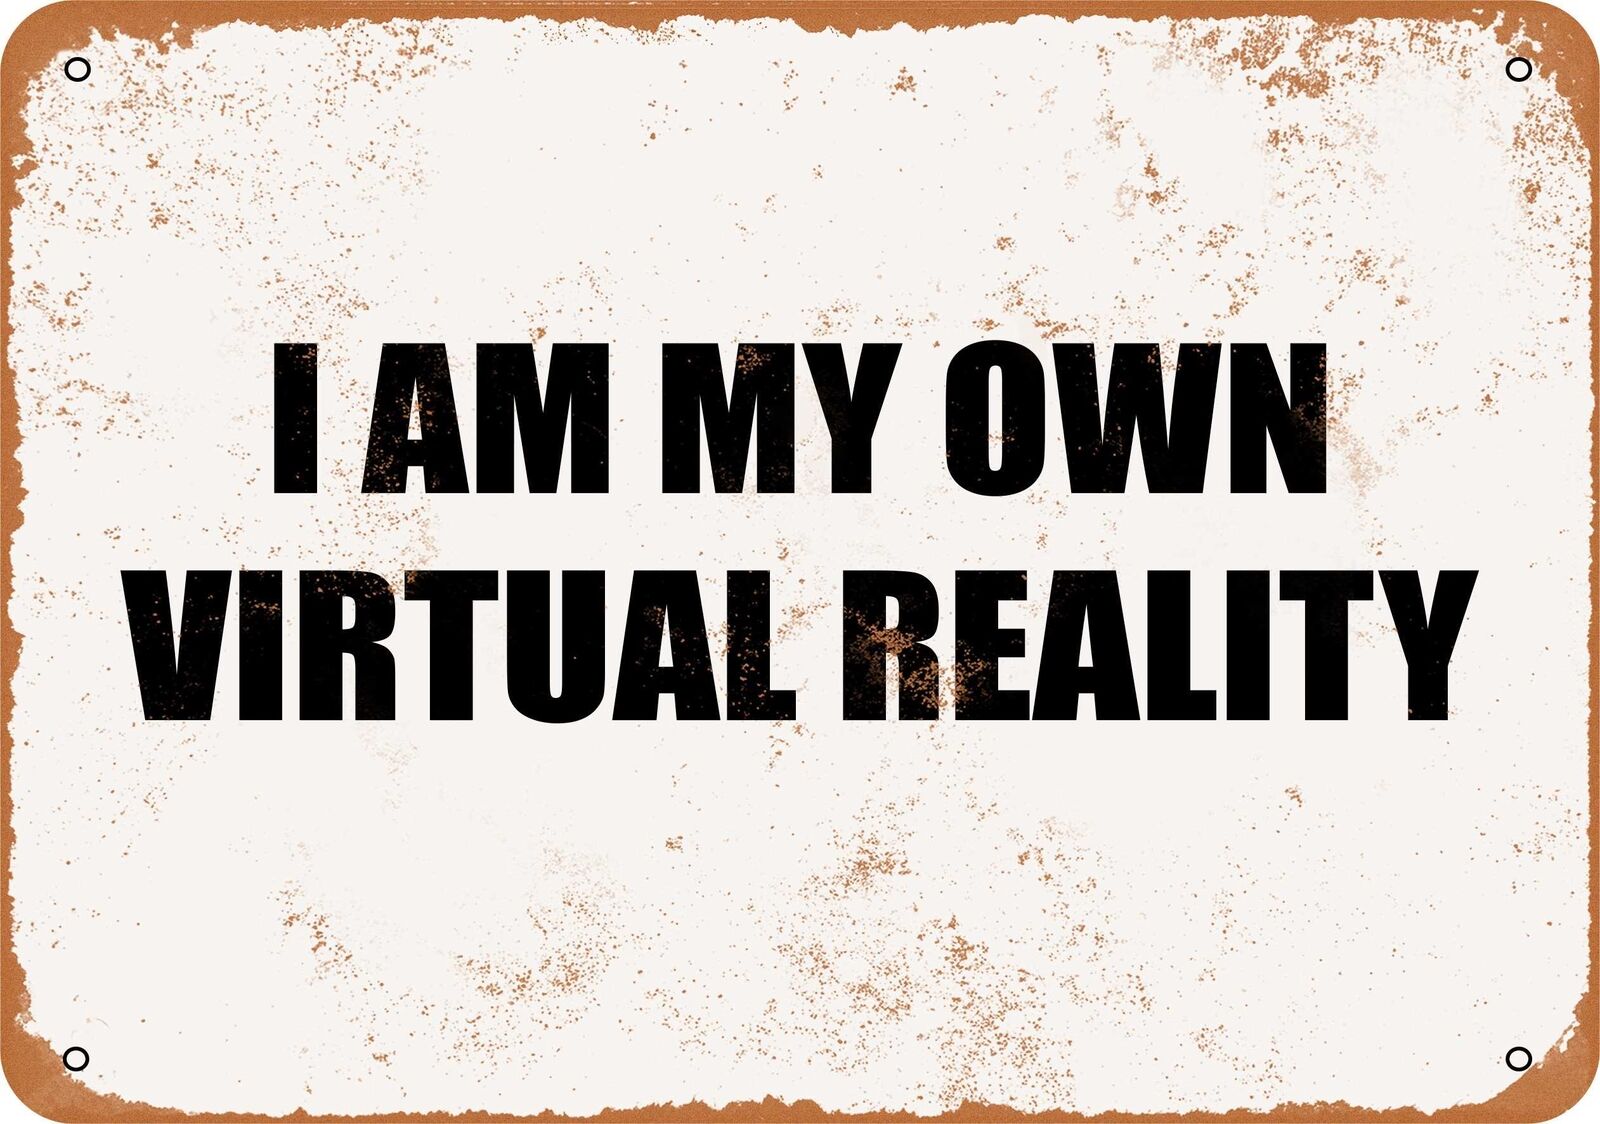 Metal Sign - I AM MY OWN VIRTUAL REALITY -- Vintage Look